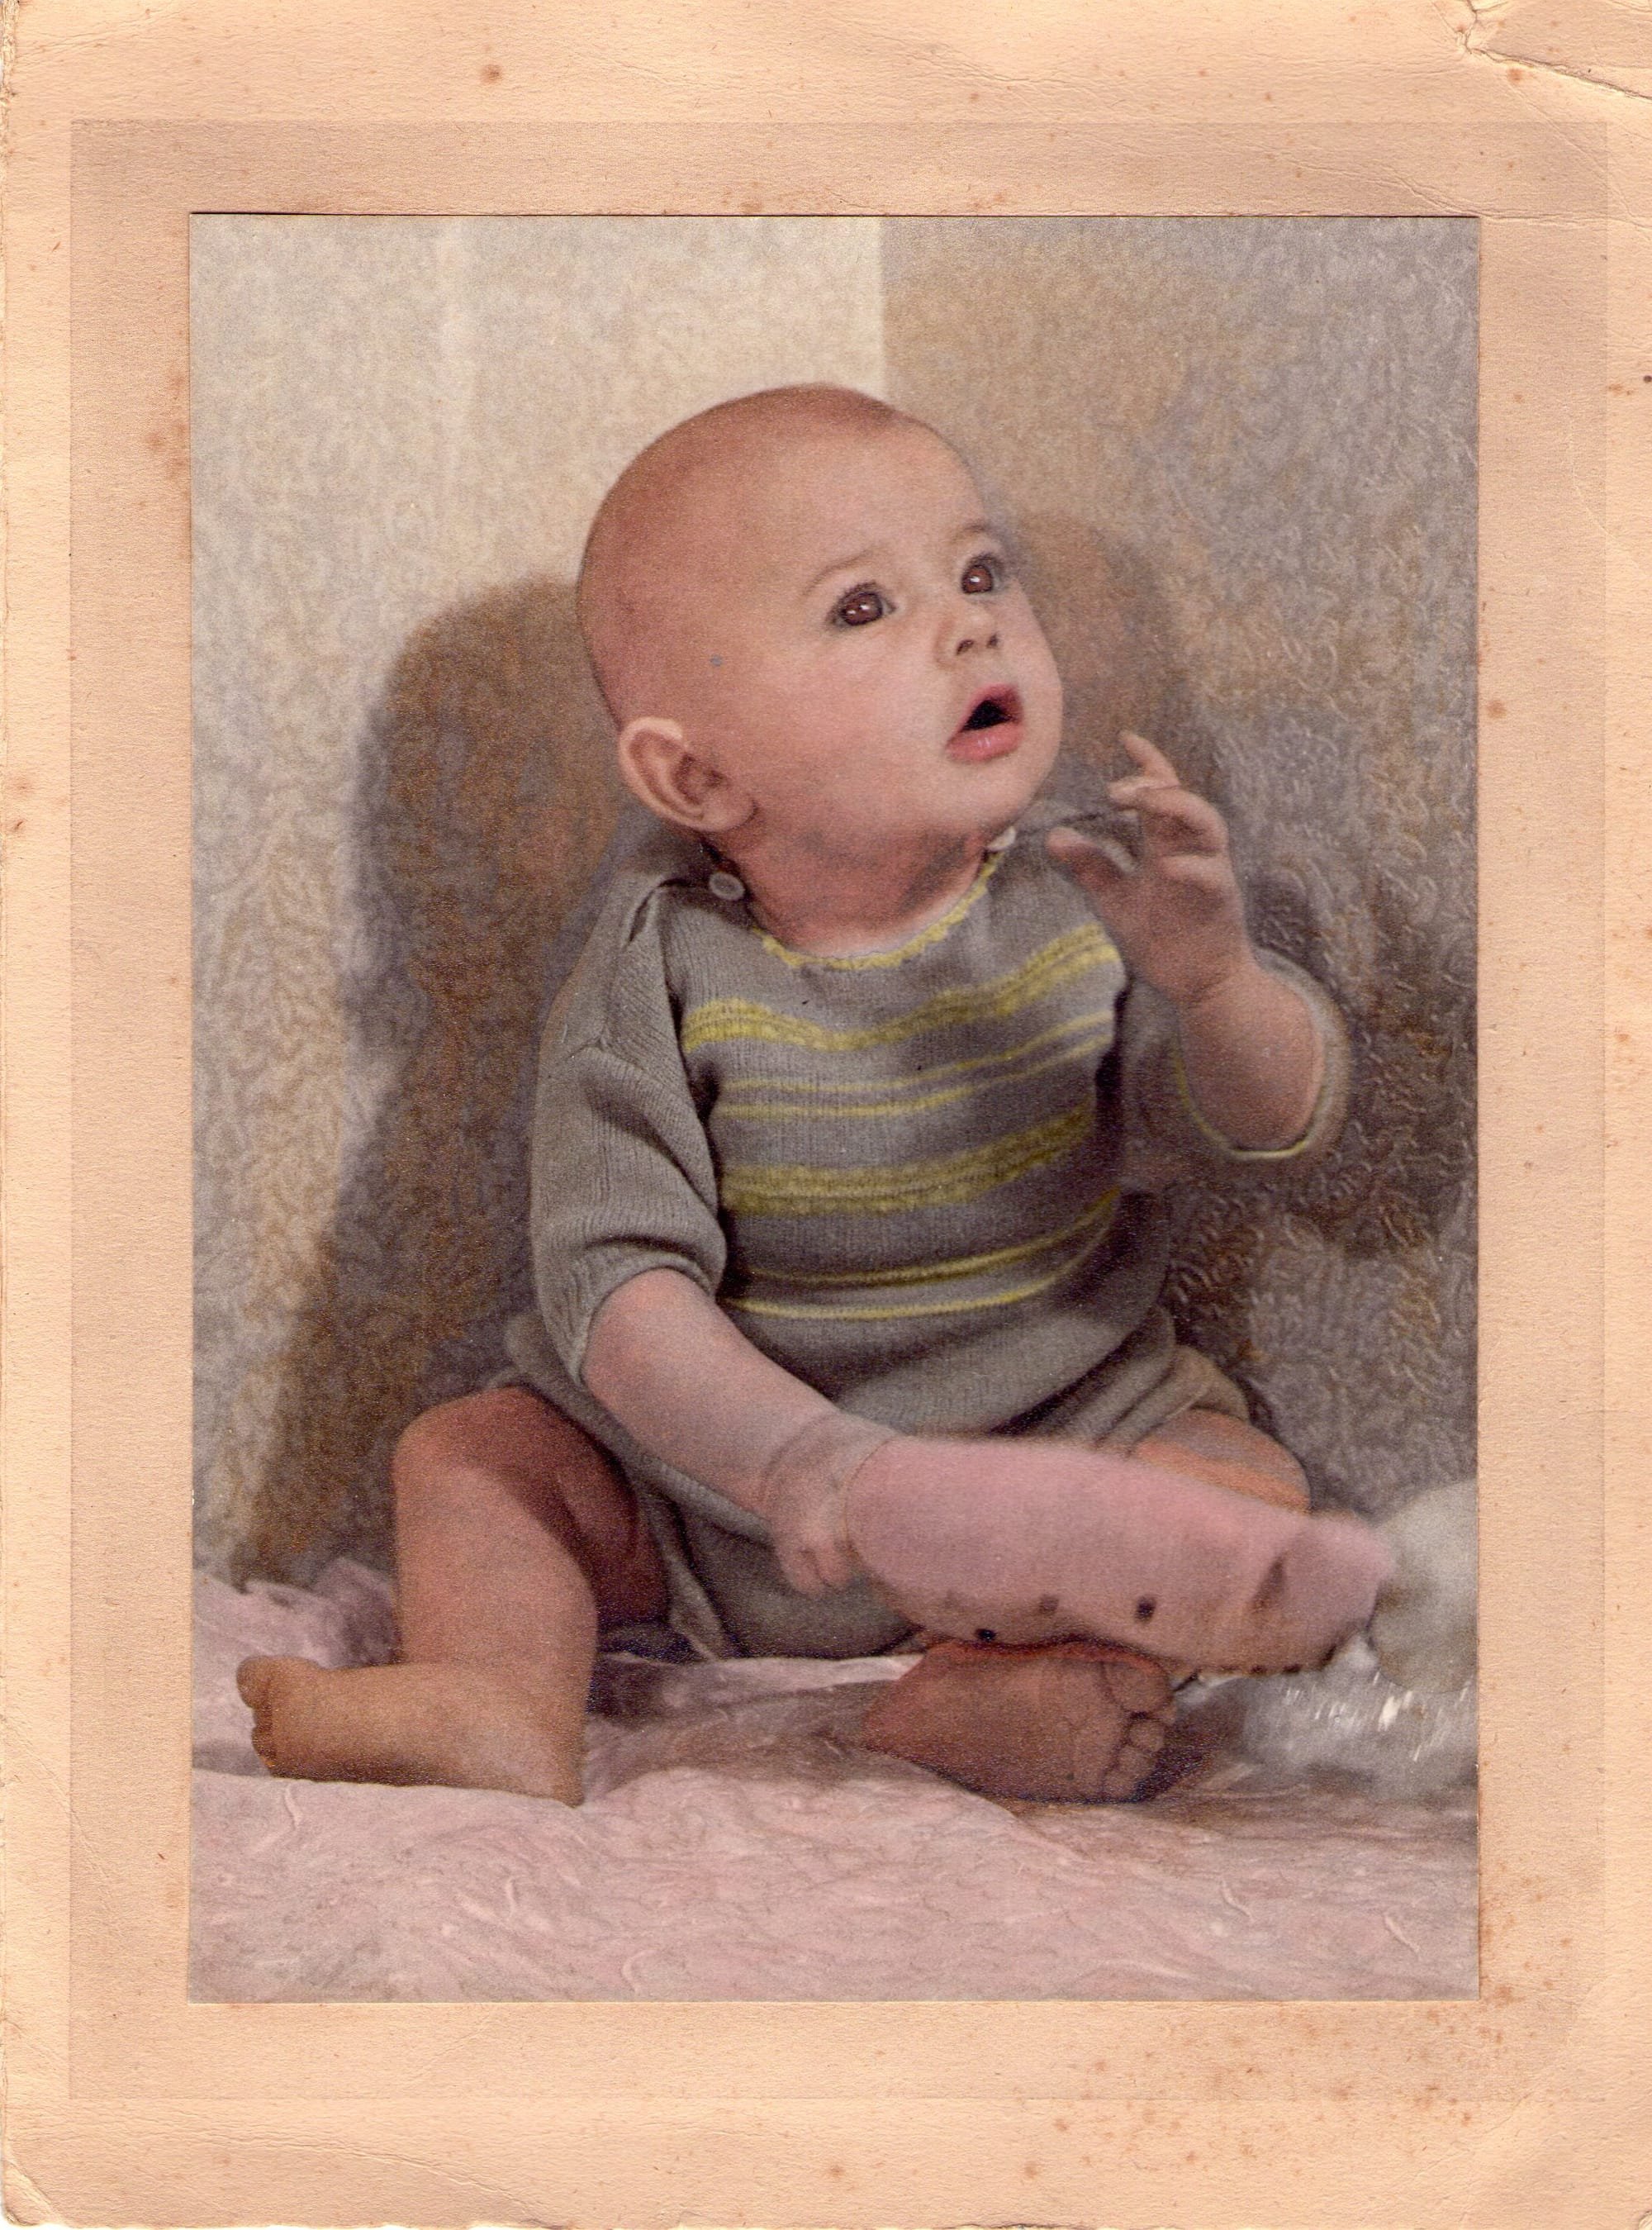 A b&w photo of Paul, hand coloured by his Granddad